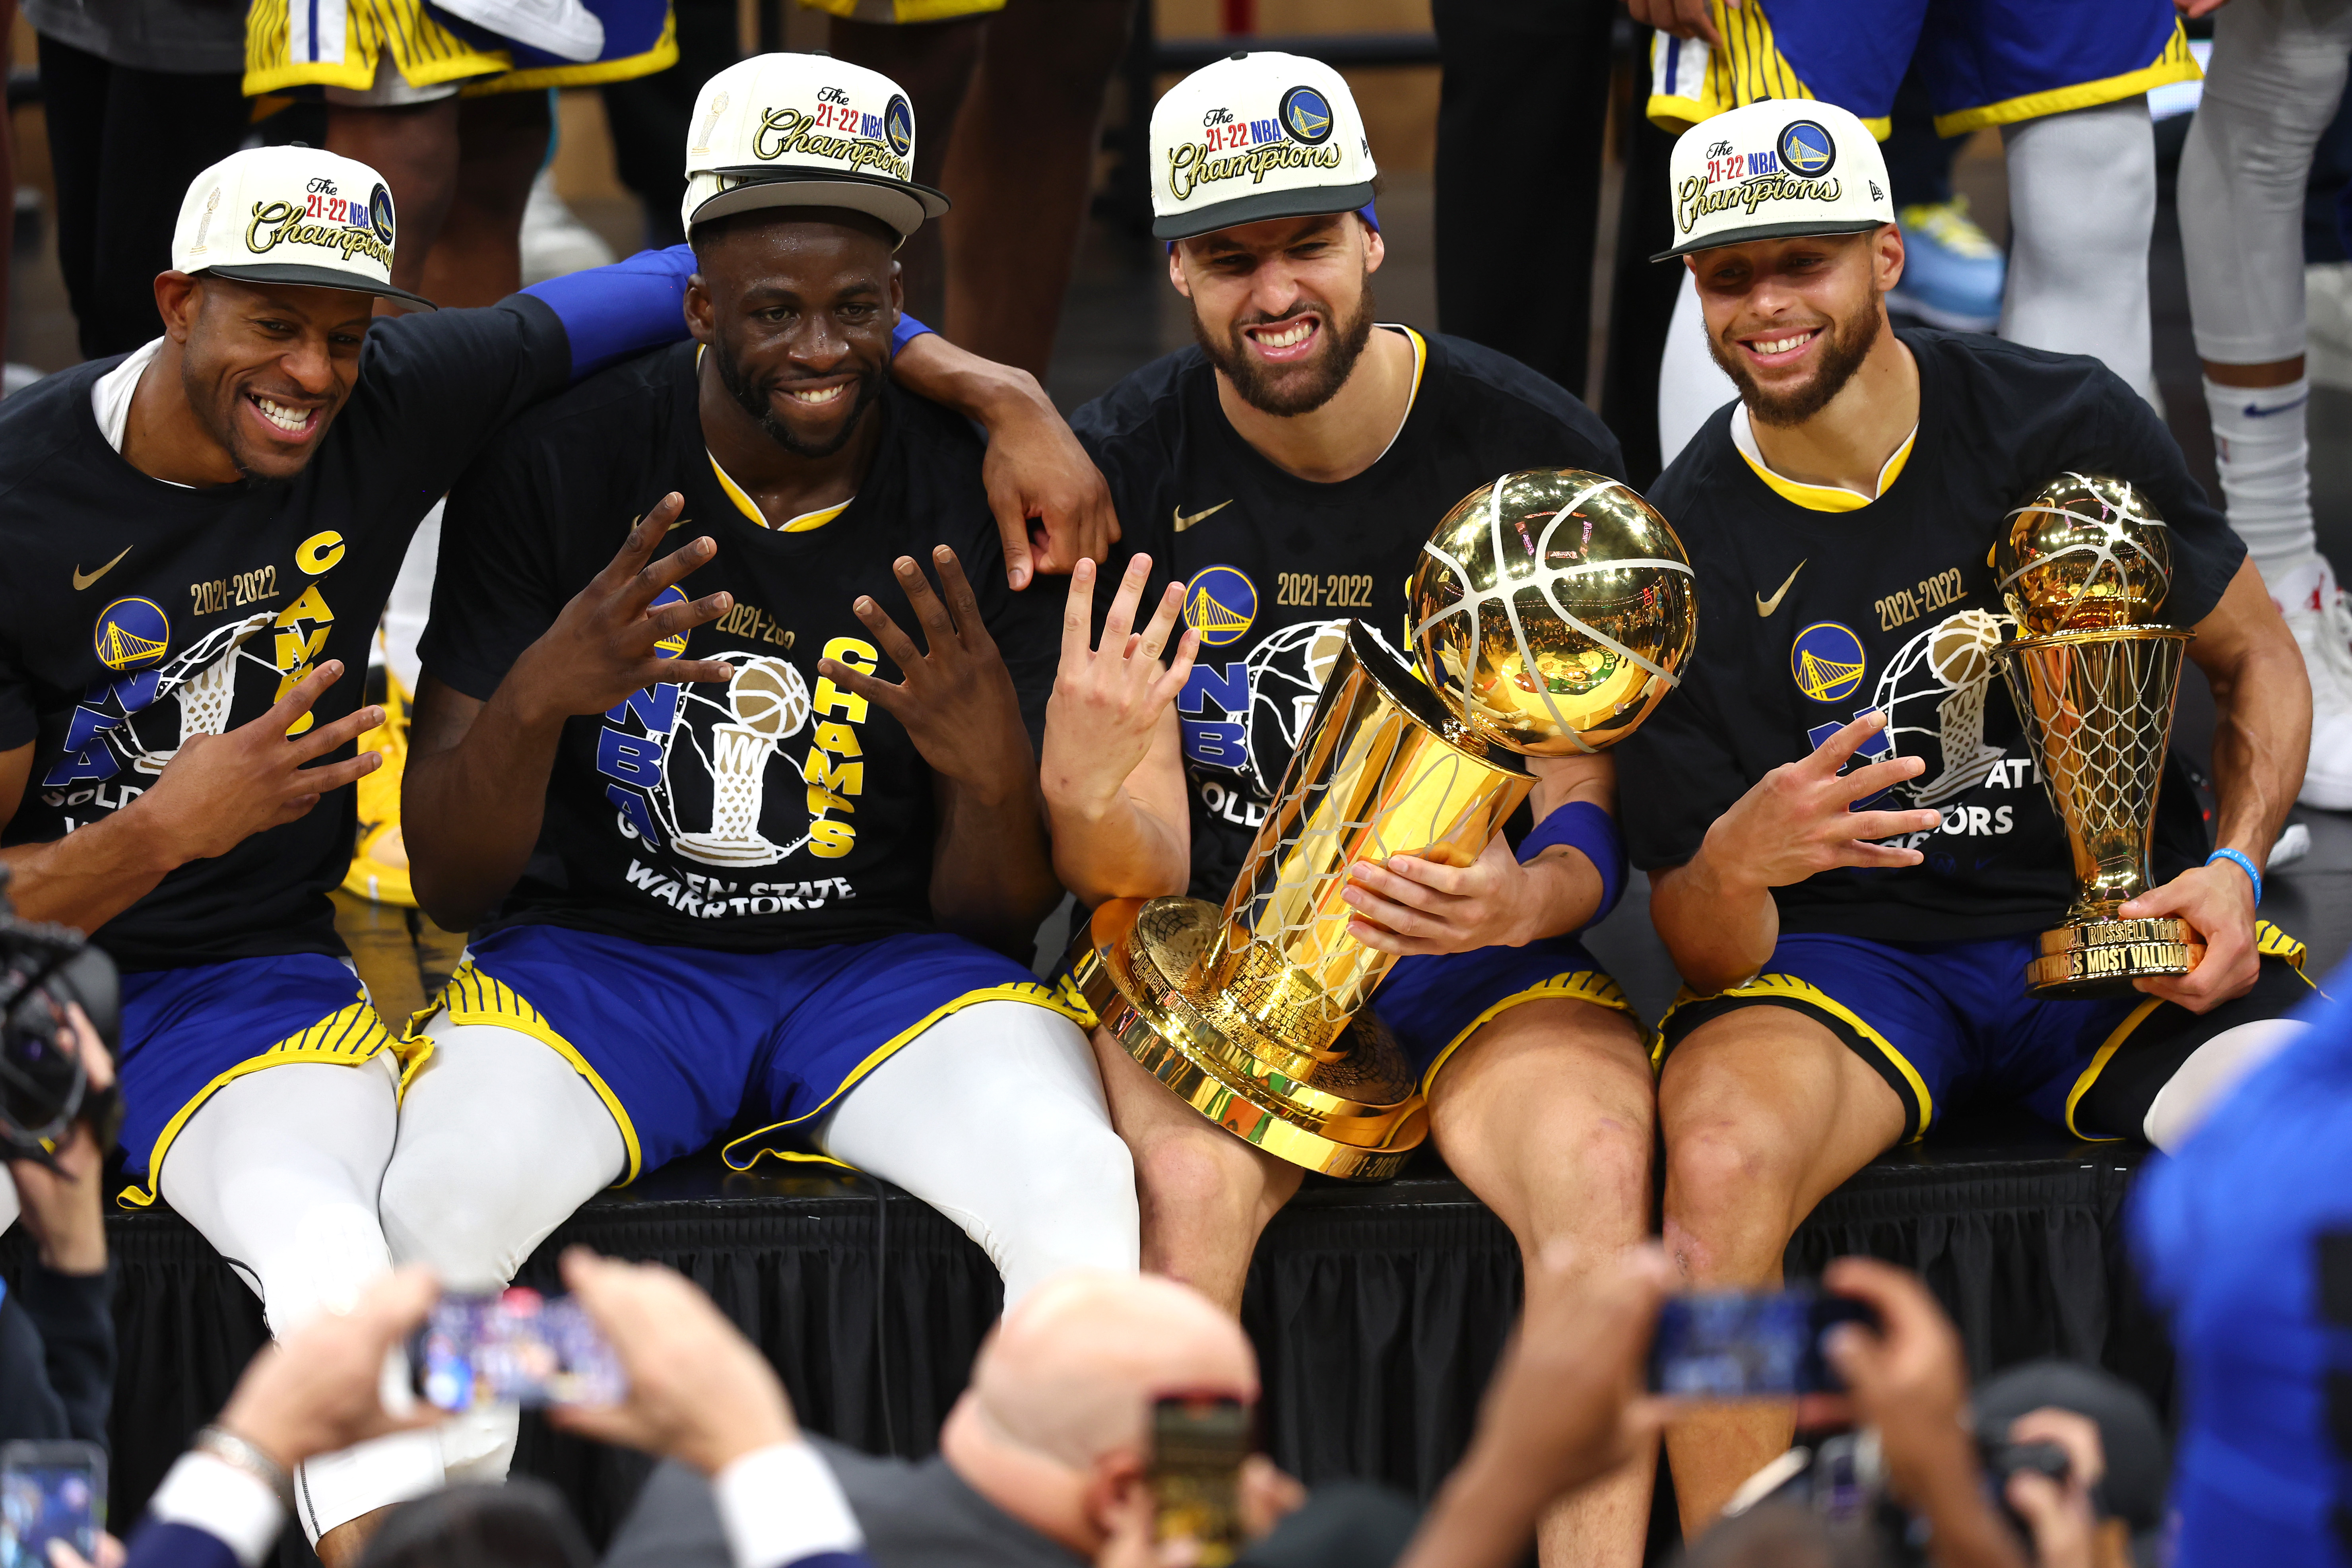 PHOTOS: Warriors Win 4th NBA Title in 8 Years